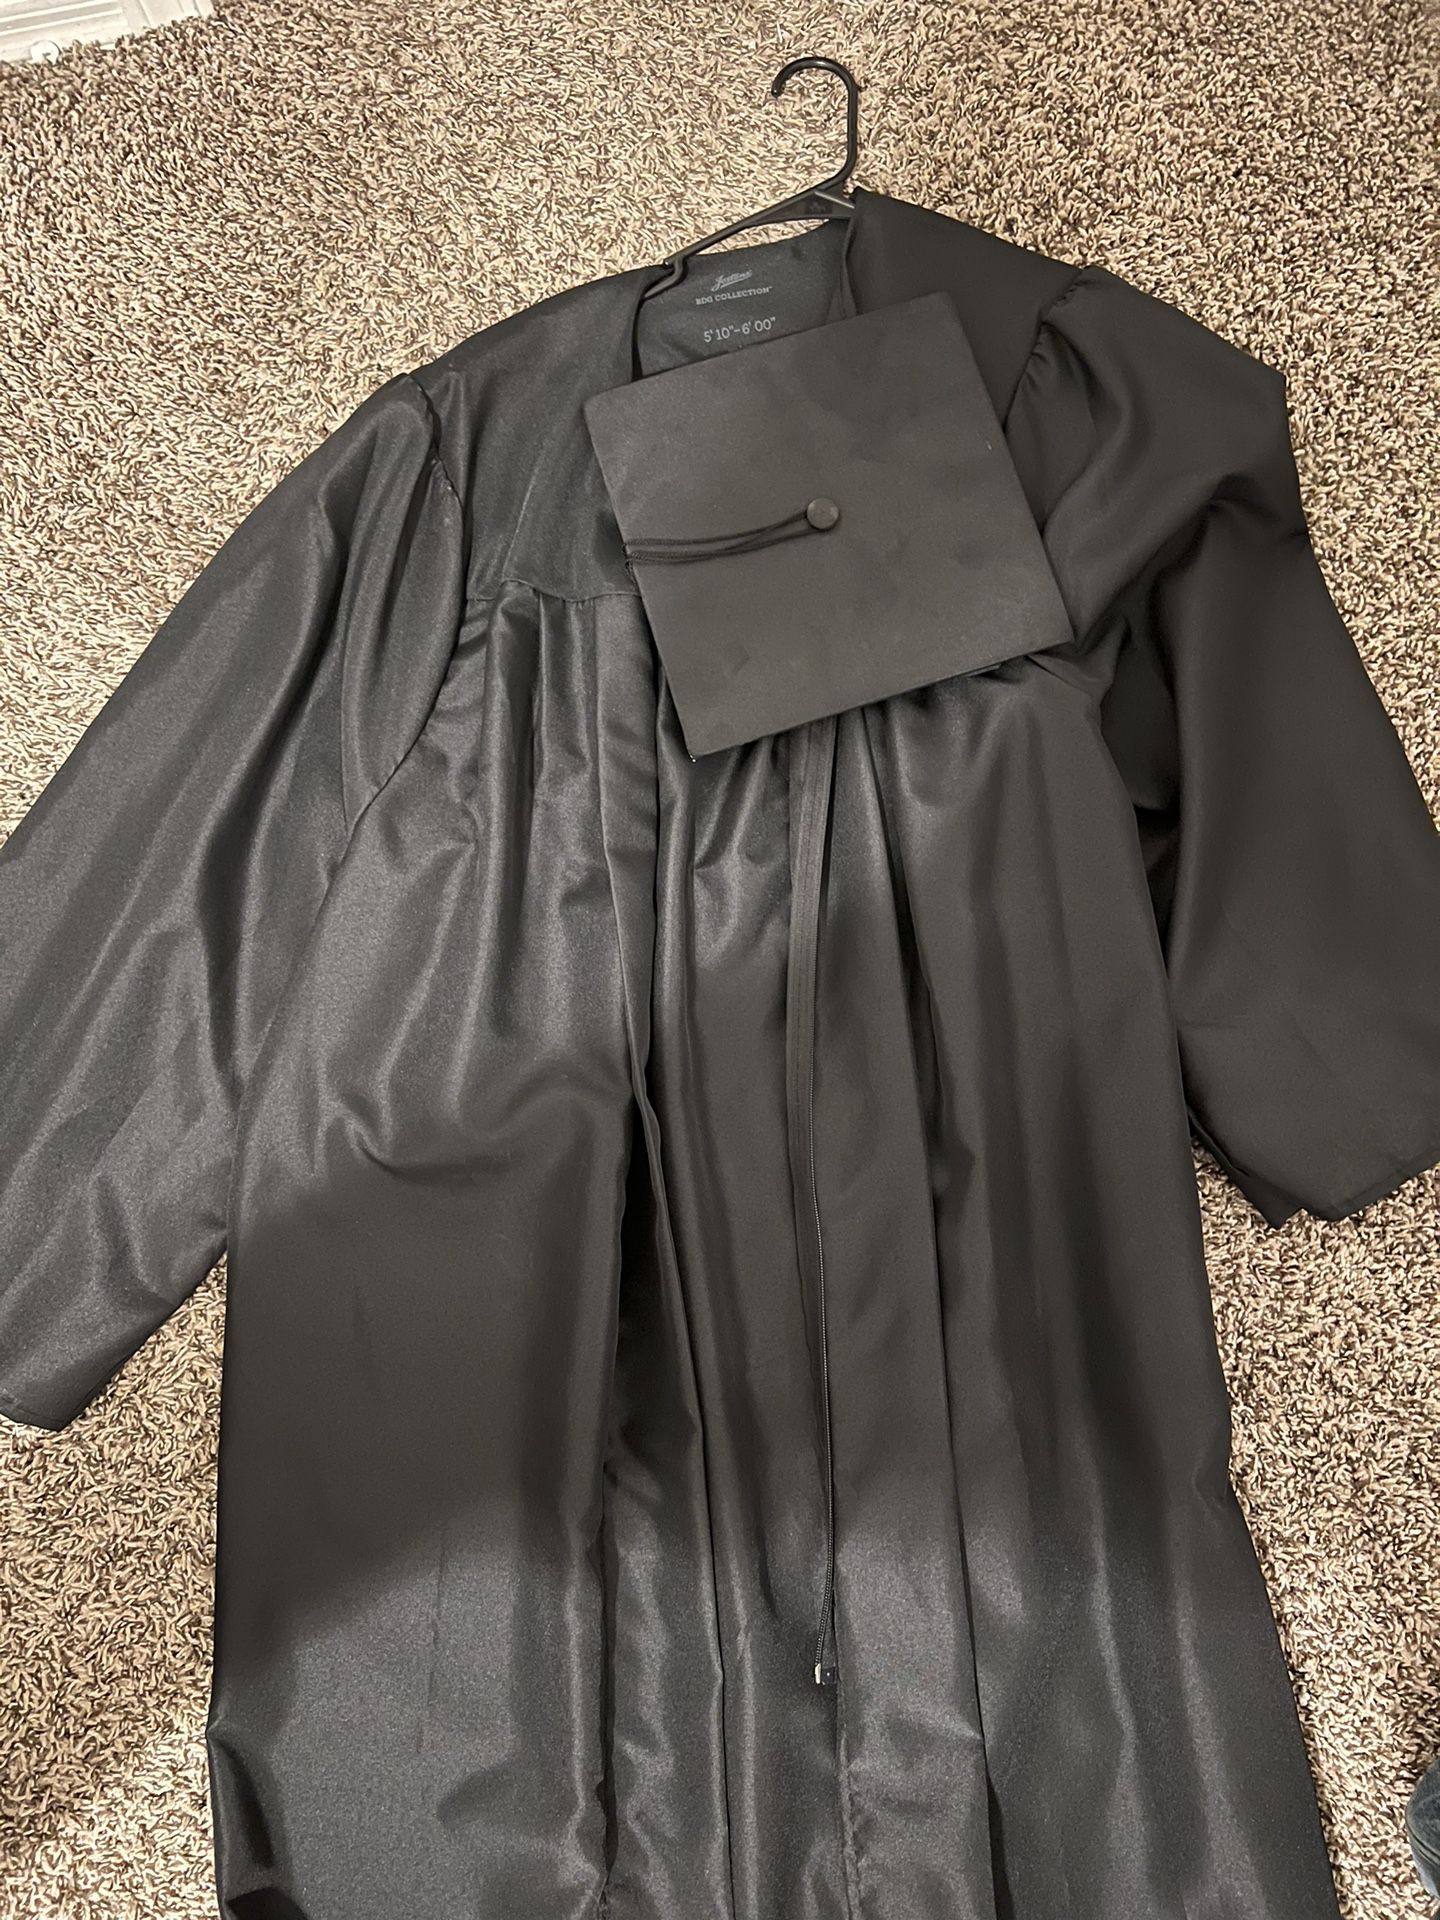 Jostens Cap And Gown